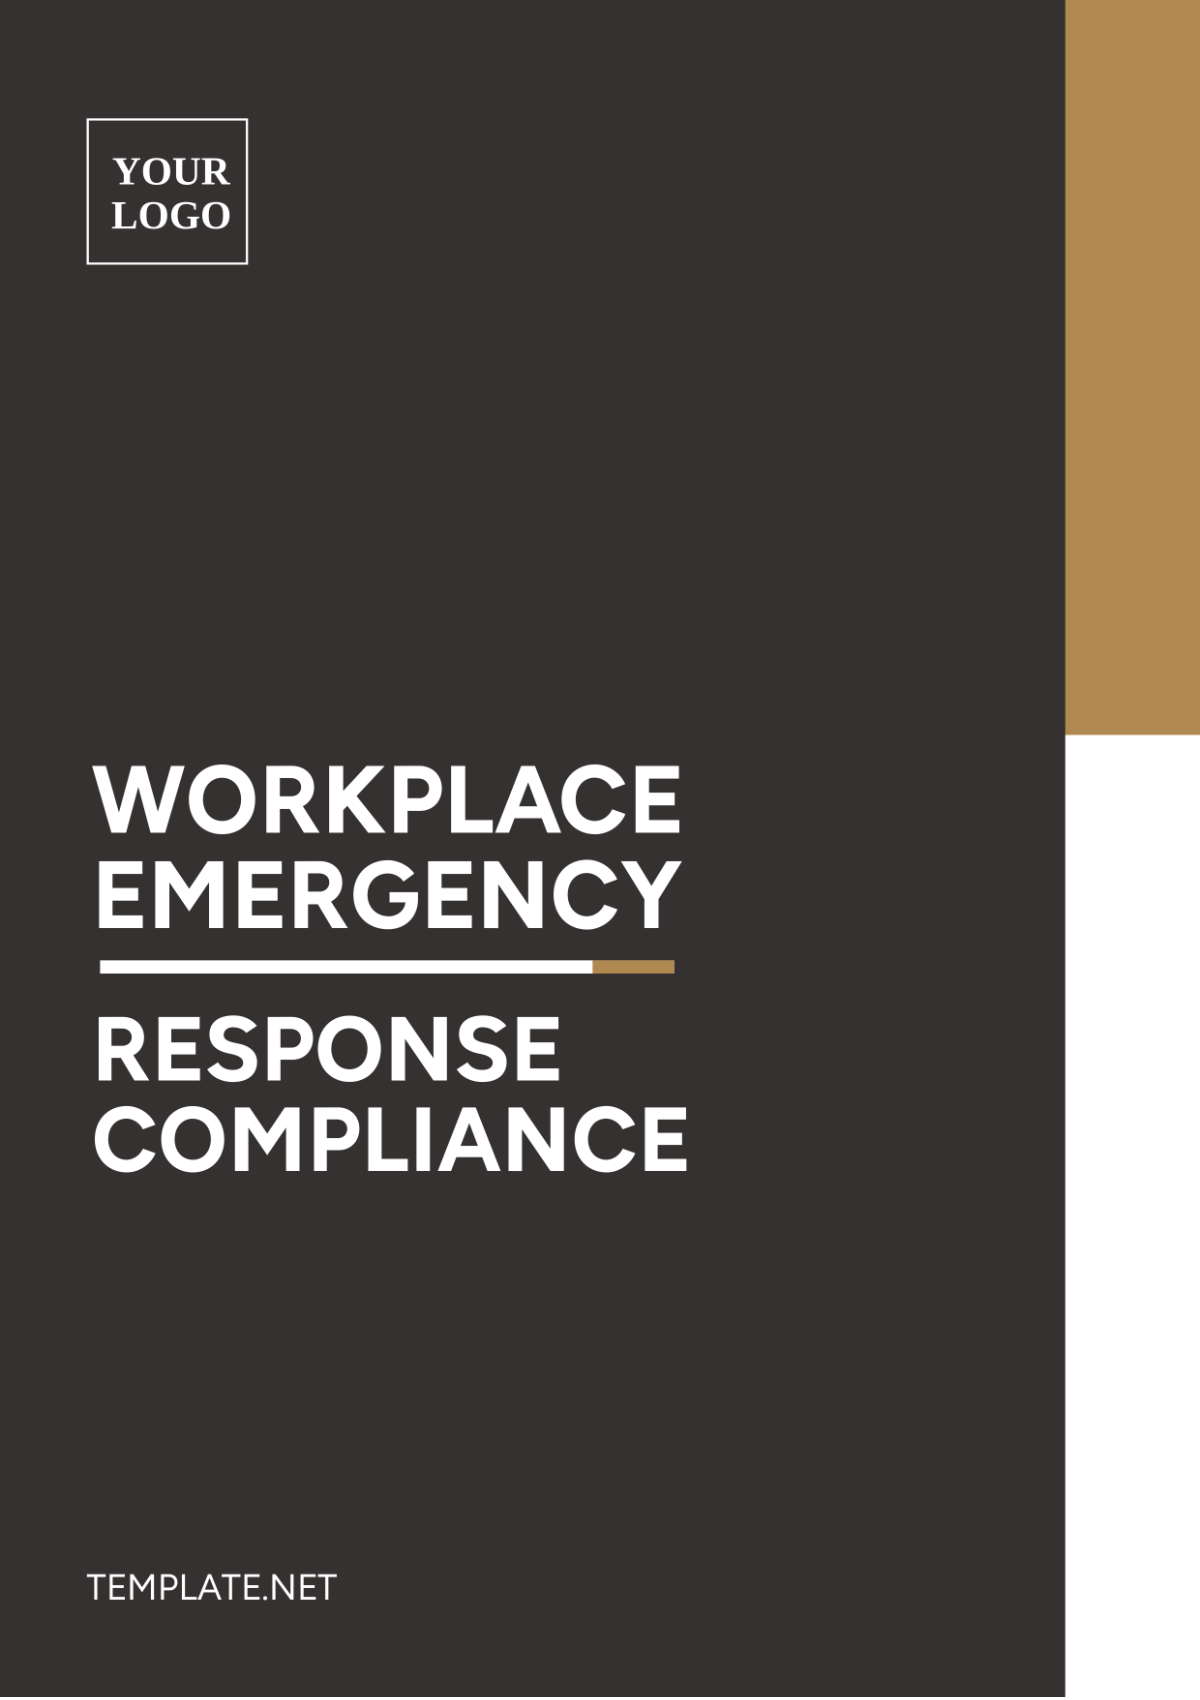 Free Workplace Emergency Response Compliance Template